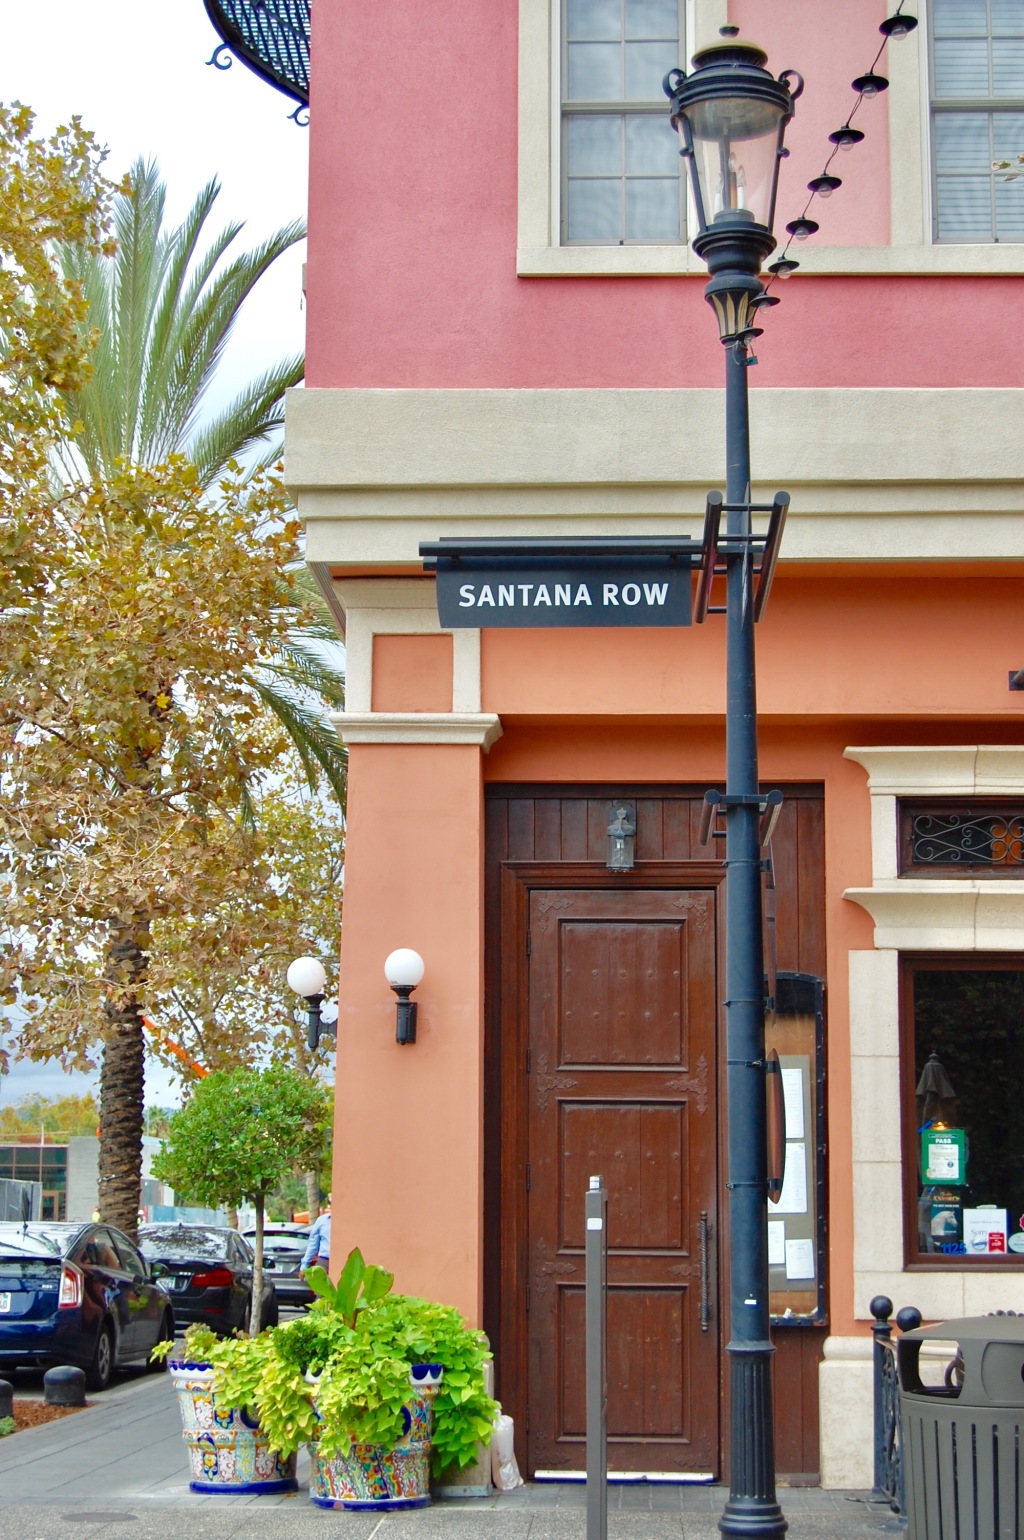 A European-style experience in the heart of Silicon Valley: Santana Row